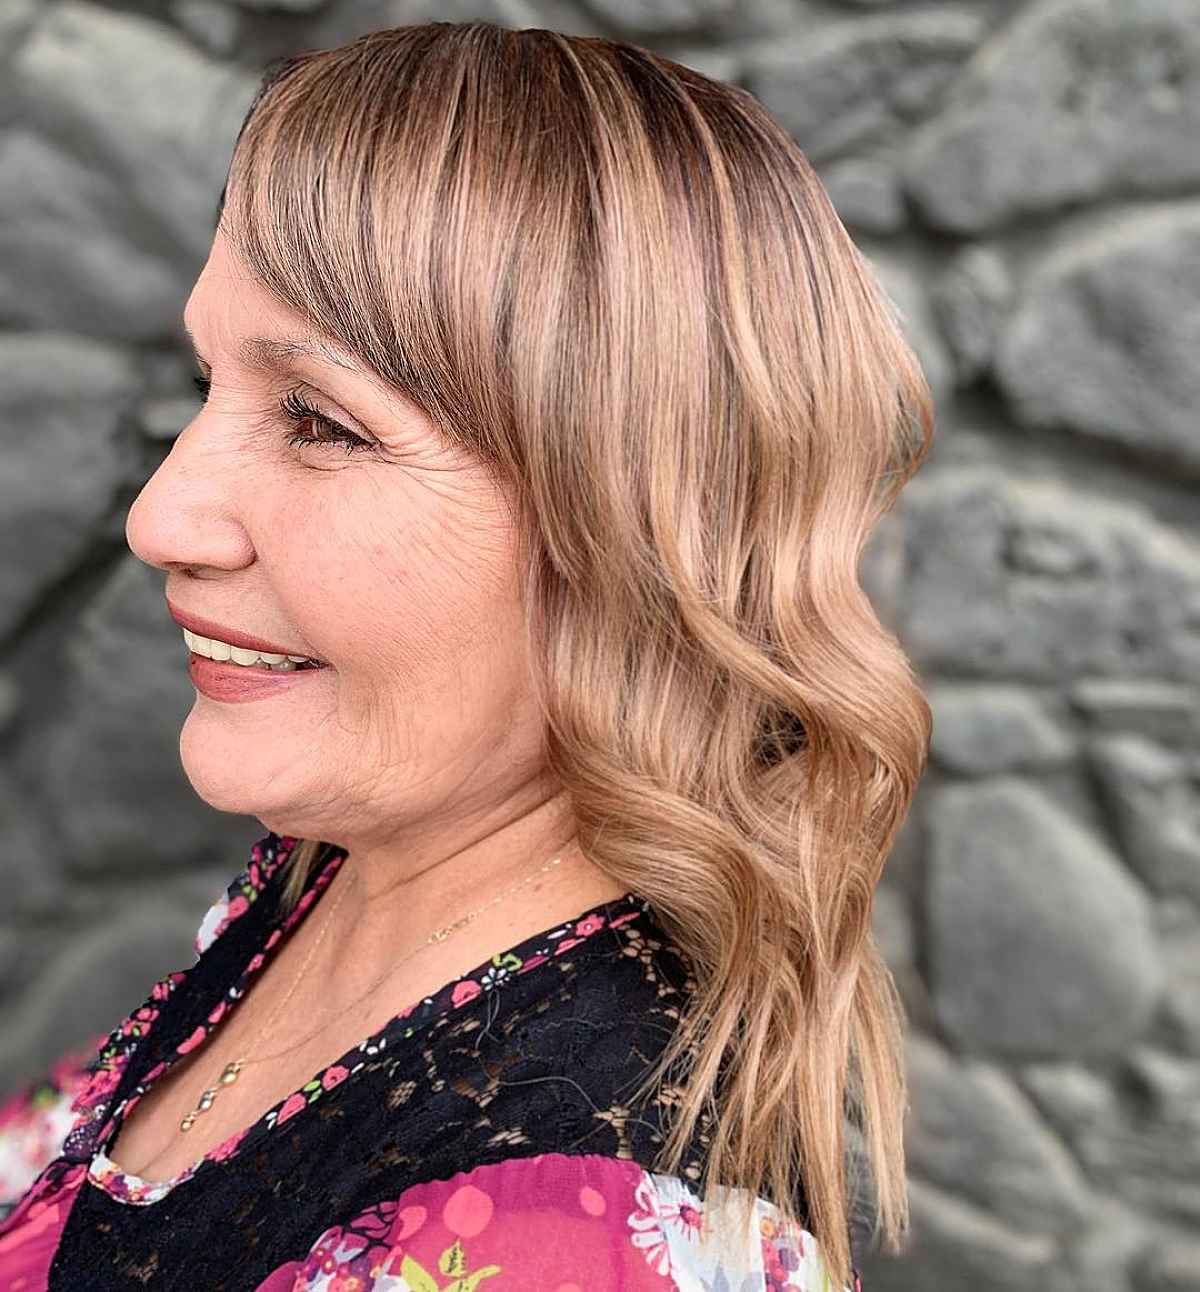 Top 10 Fall Hair Colors for Women Over 70 in 2021